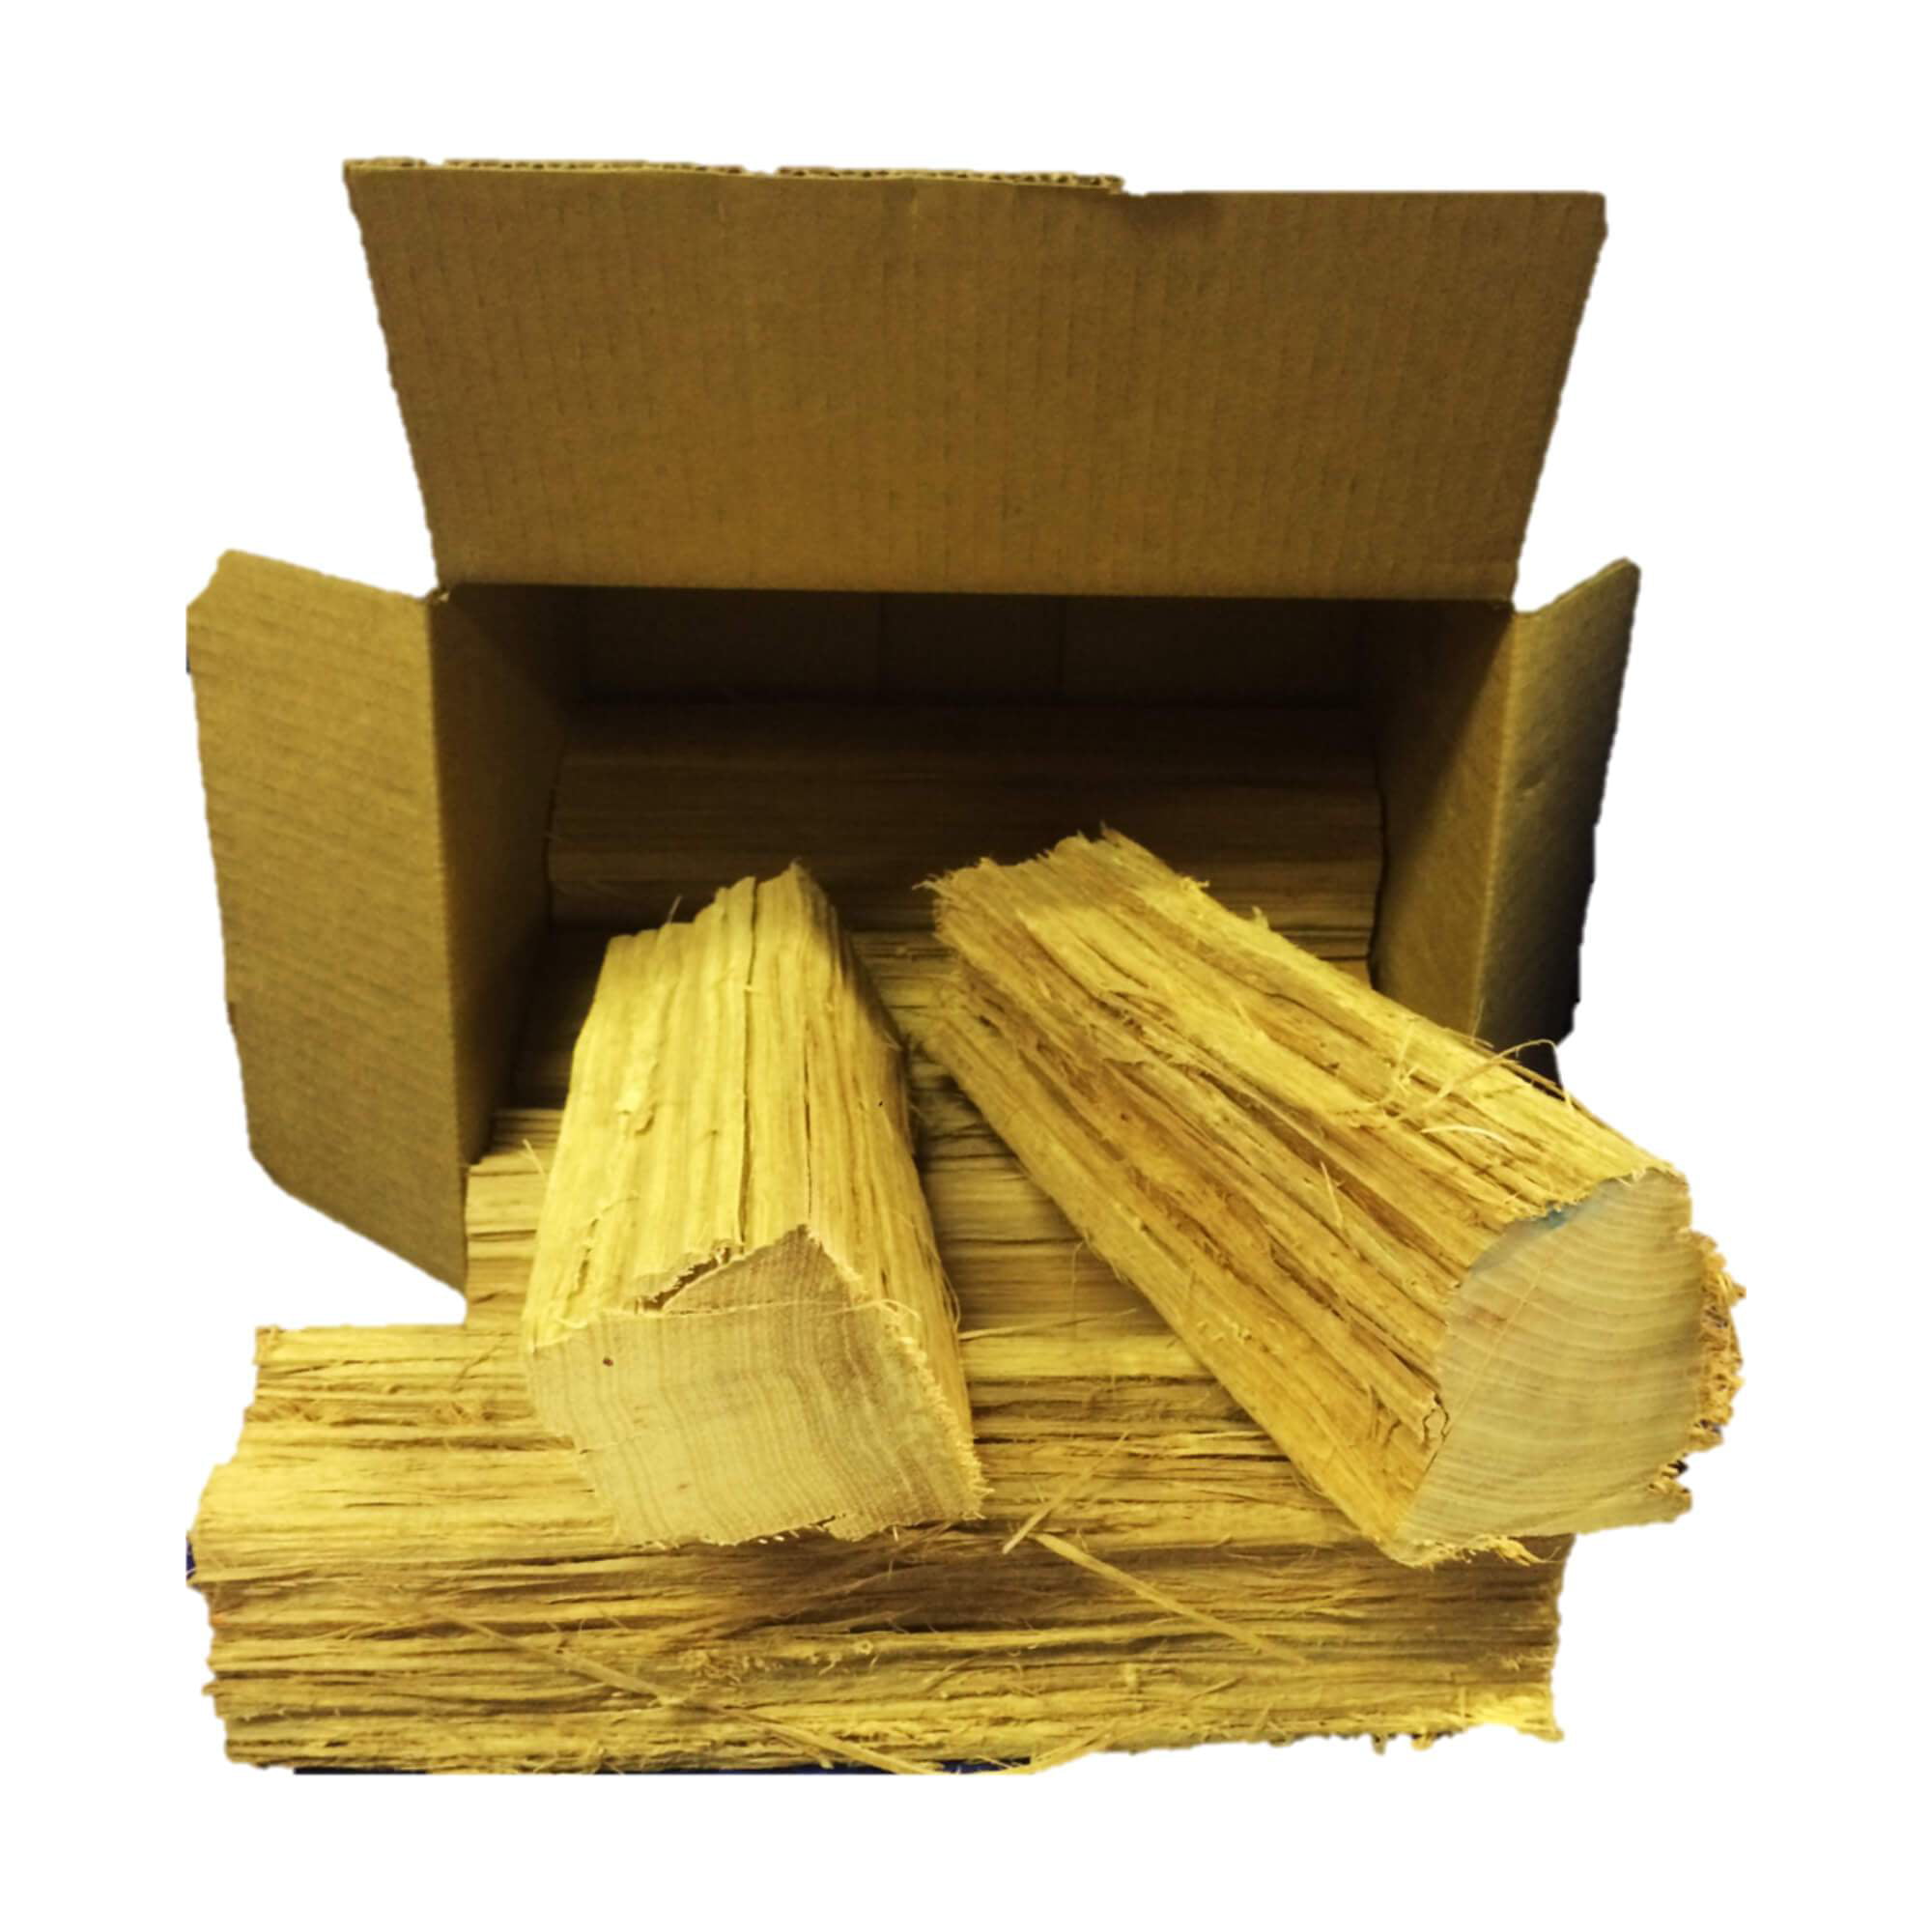 Hickory Wood Logs for BBQ/Grilling/Wood Smoking! Arts and Crafts15lbs-19lbs